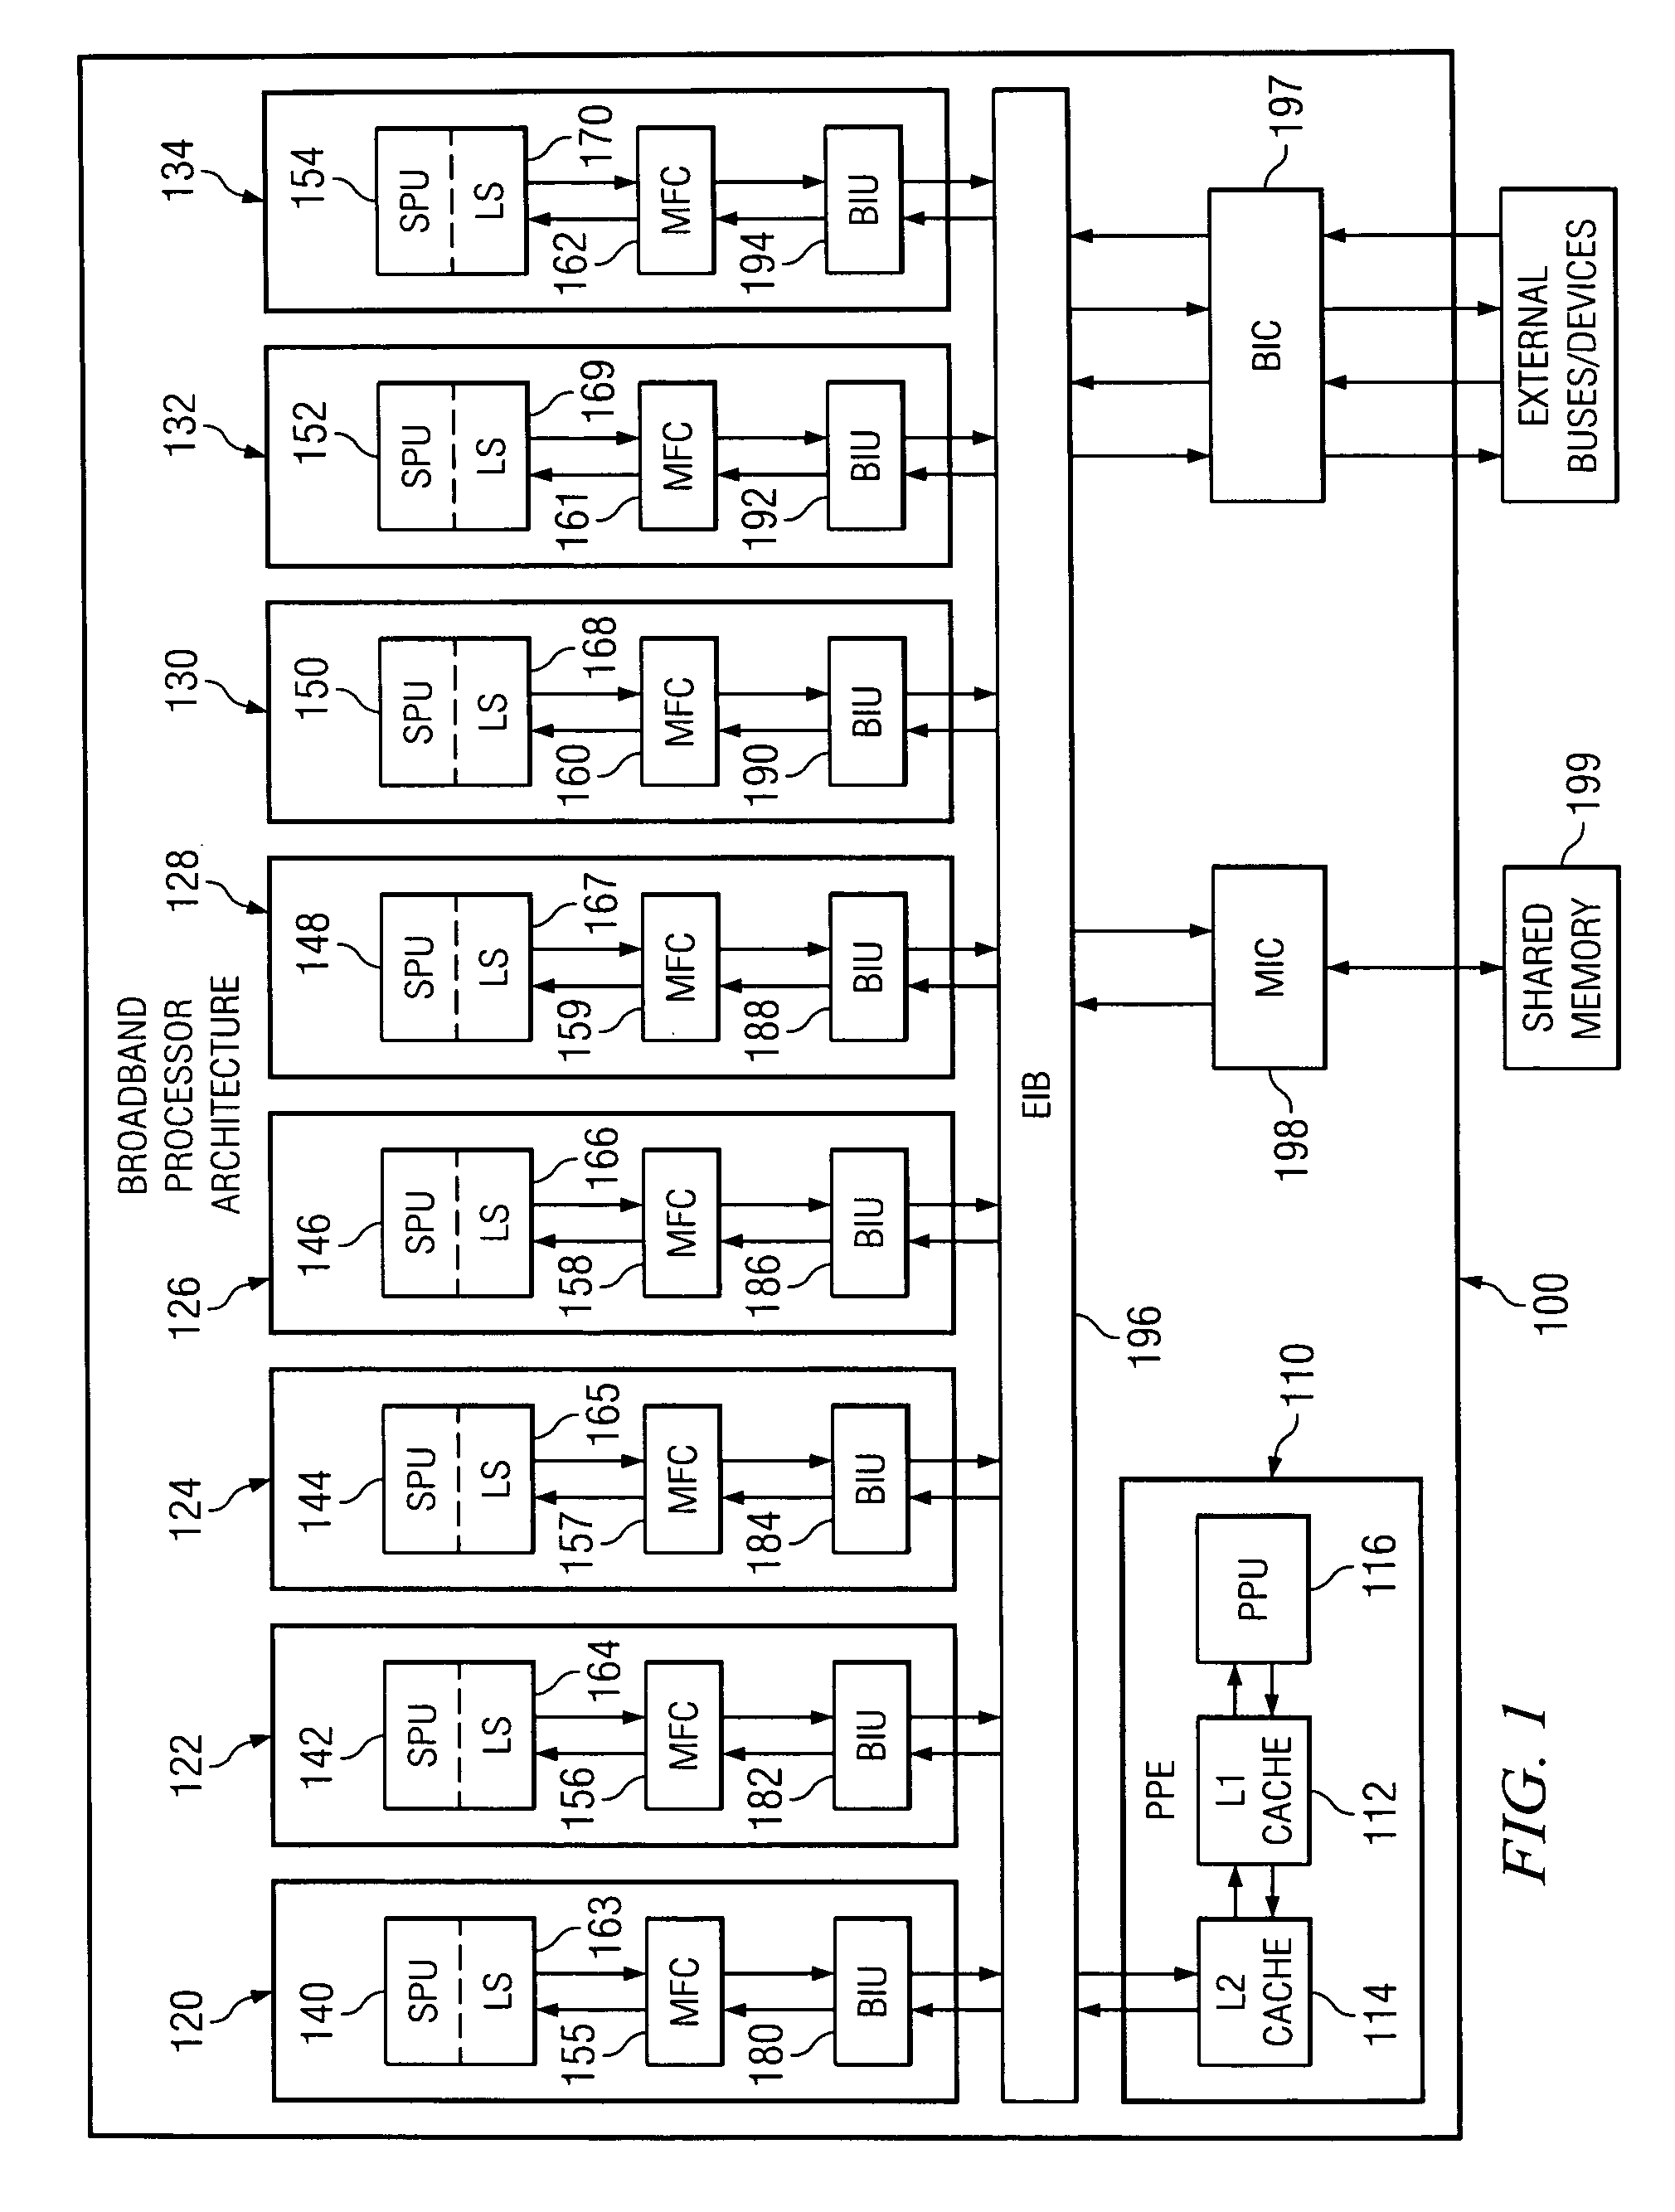 Apparatus and method for partitioning programs between a general purpose core and one or more accelerators